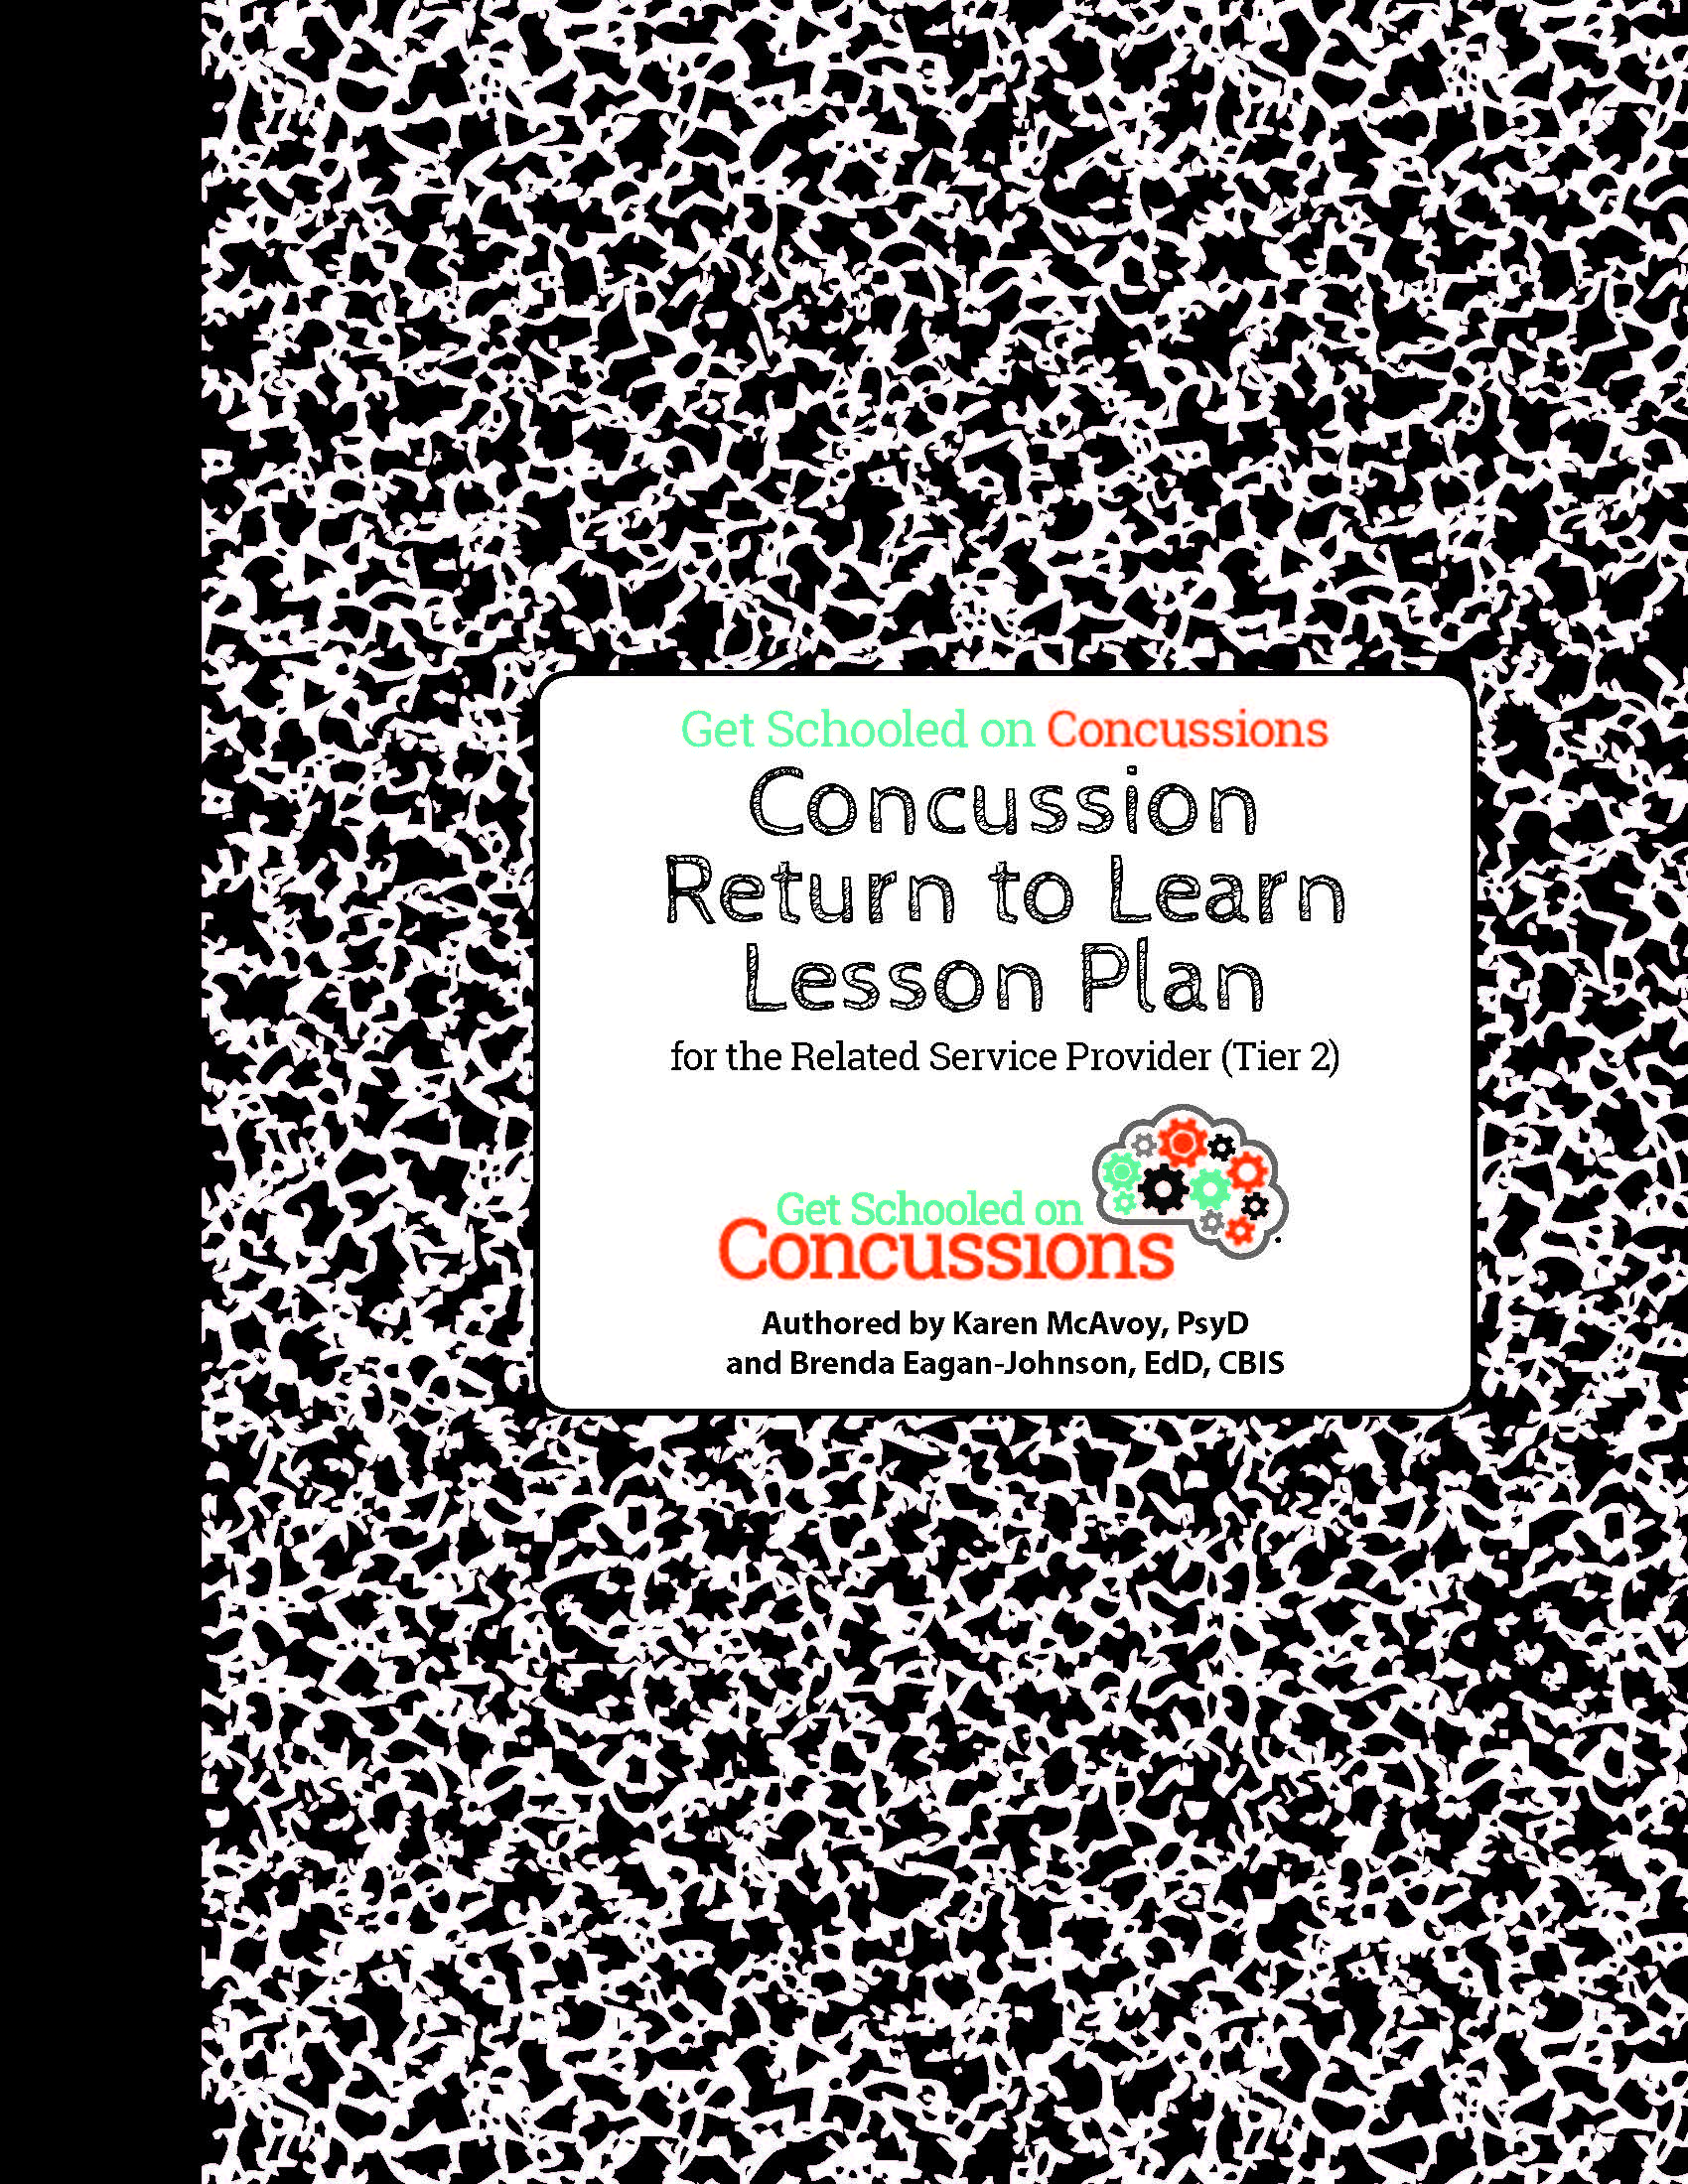 Concussion Return to Learn Lesson Plan 